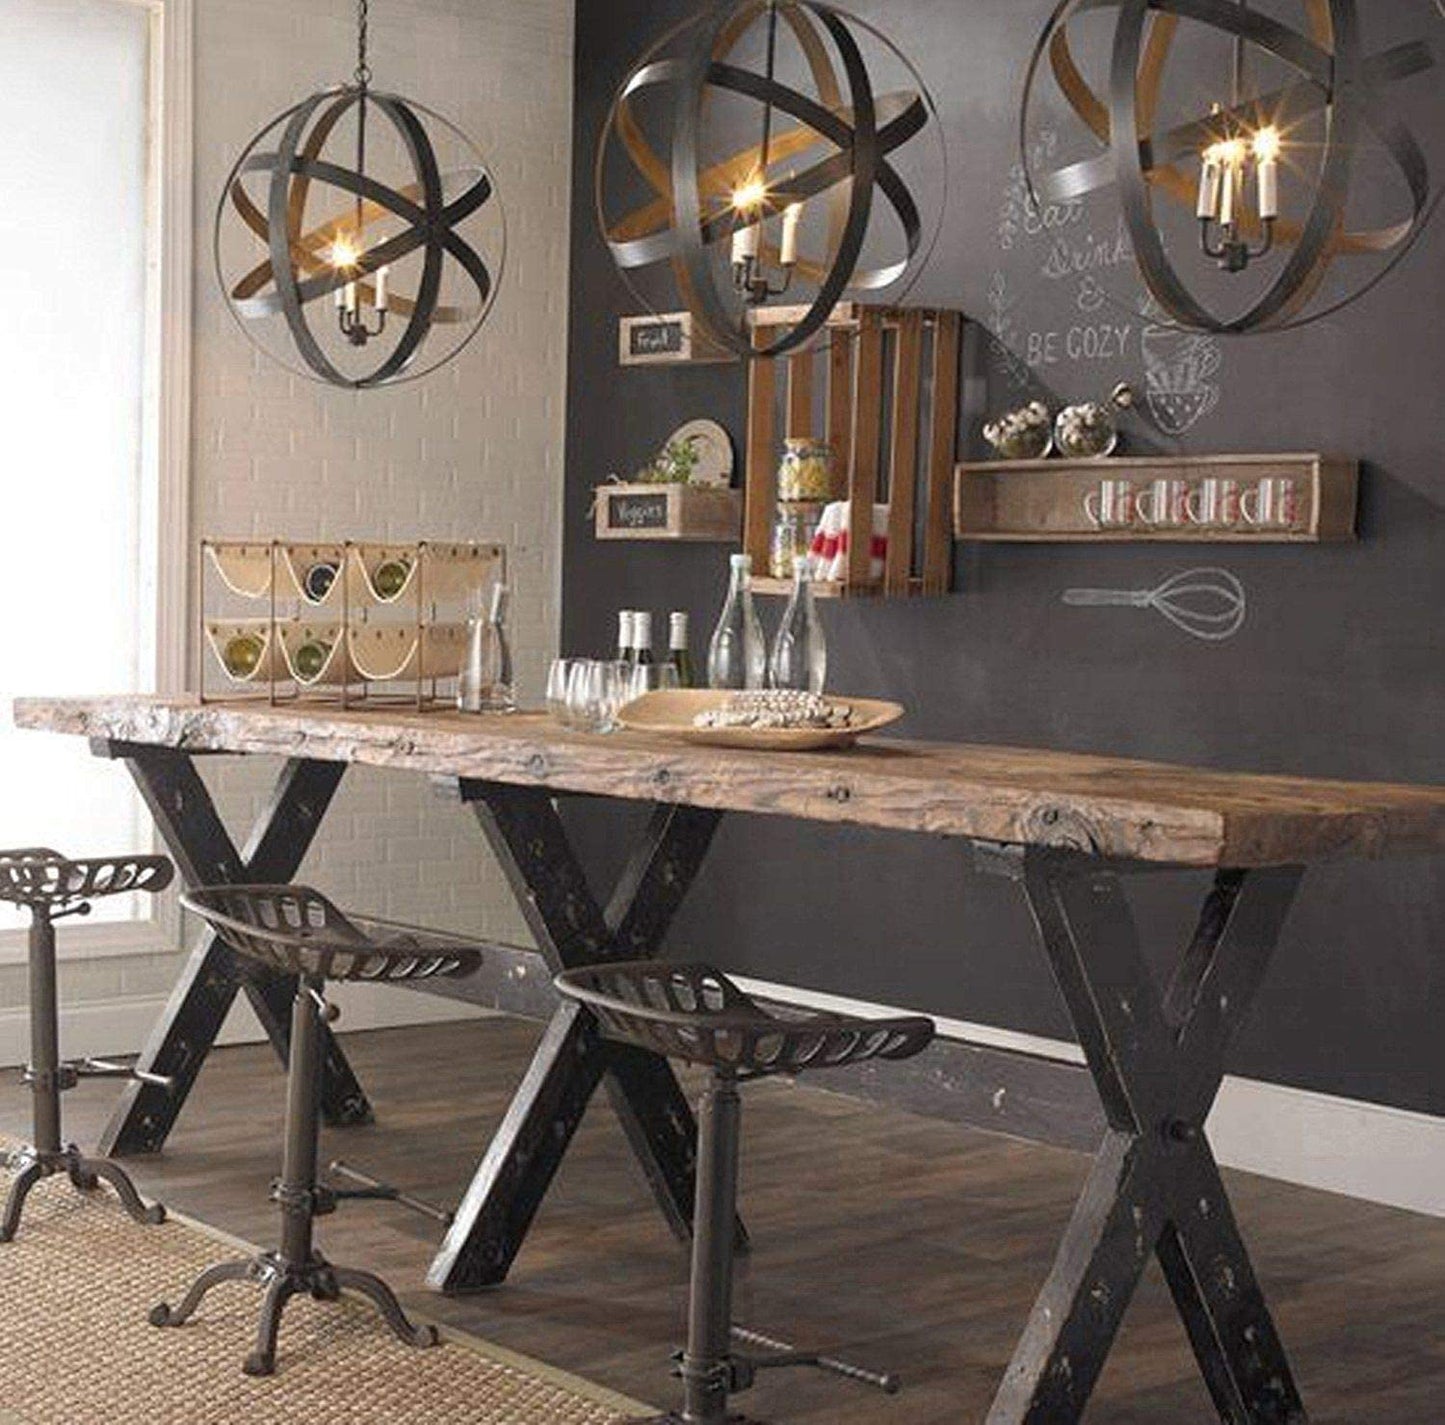 Industrial Bar Stool-Swivel Tractor Seat-Kitchen Dining Counter Chair-Extra Pub Height- Adjustable 24.8-31"-Iron Cast Design